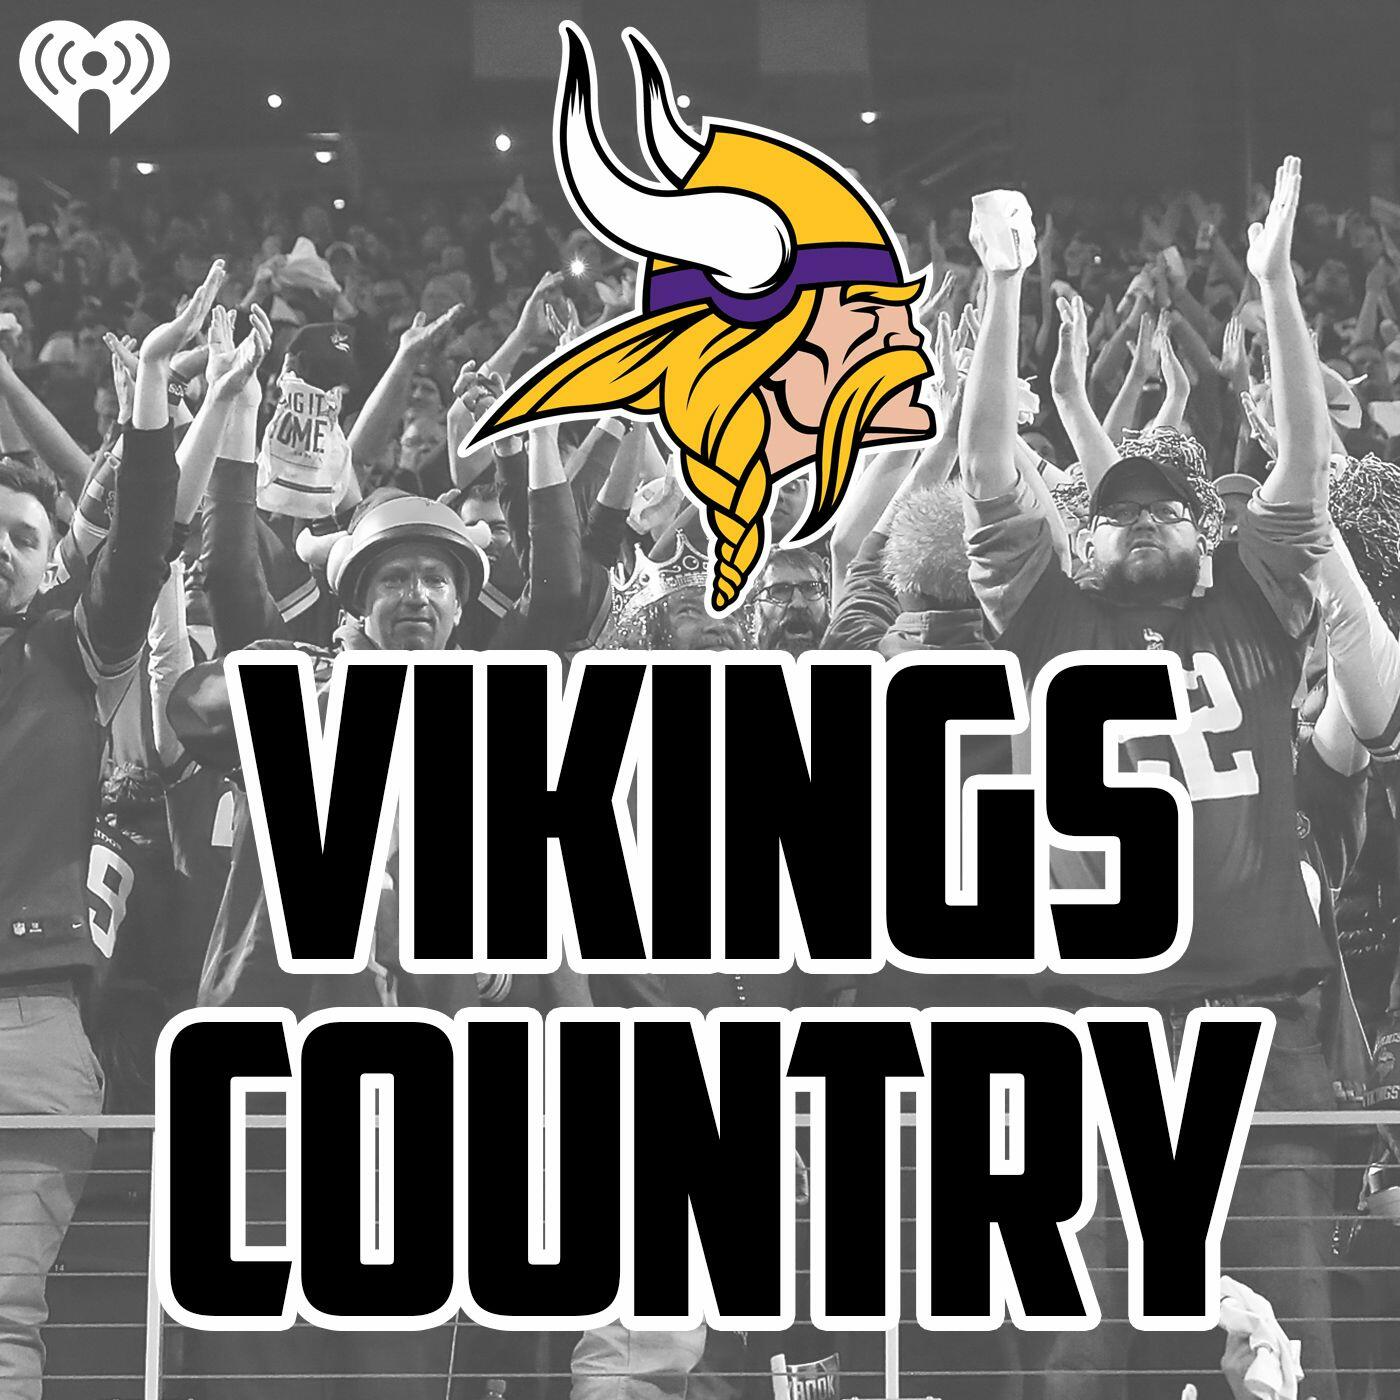 Eagles Nest Lounge - Vikings Country radio show with Mike Mussman on KFAN  100.3 FM will be recording the show at the Eagles Nest along with a current  Vikings player. Thursday Dec